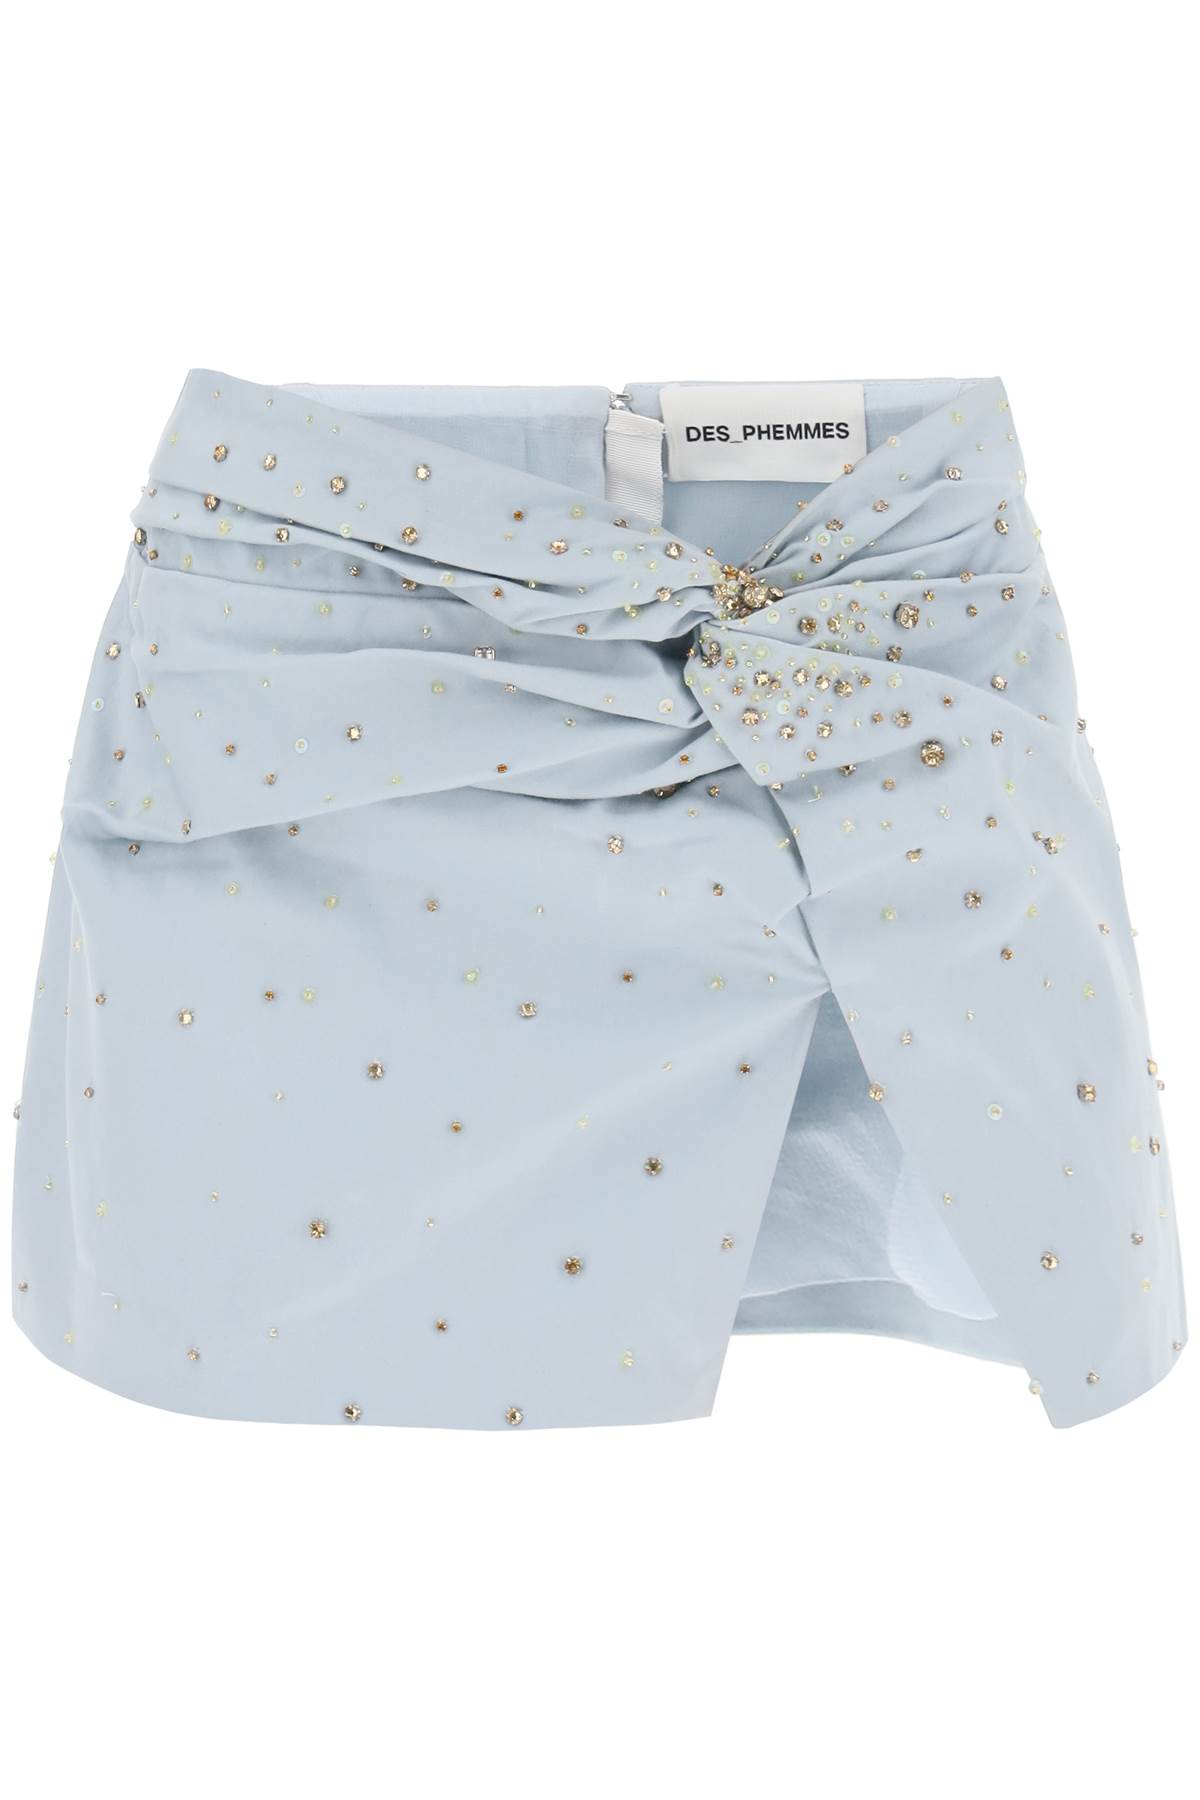 Des Phemmes Mini Skirt With Crystals